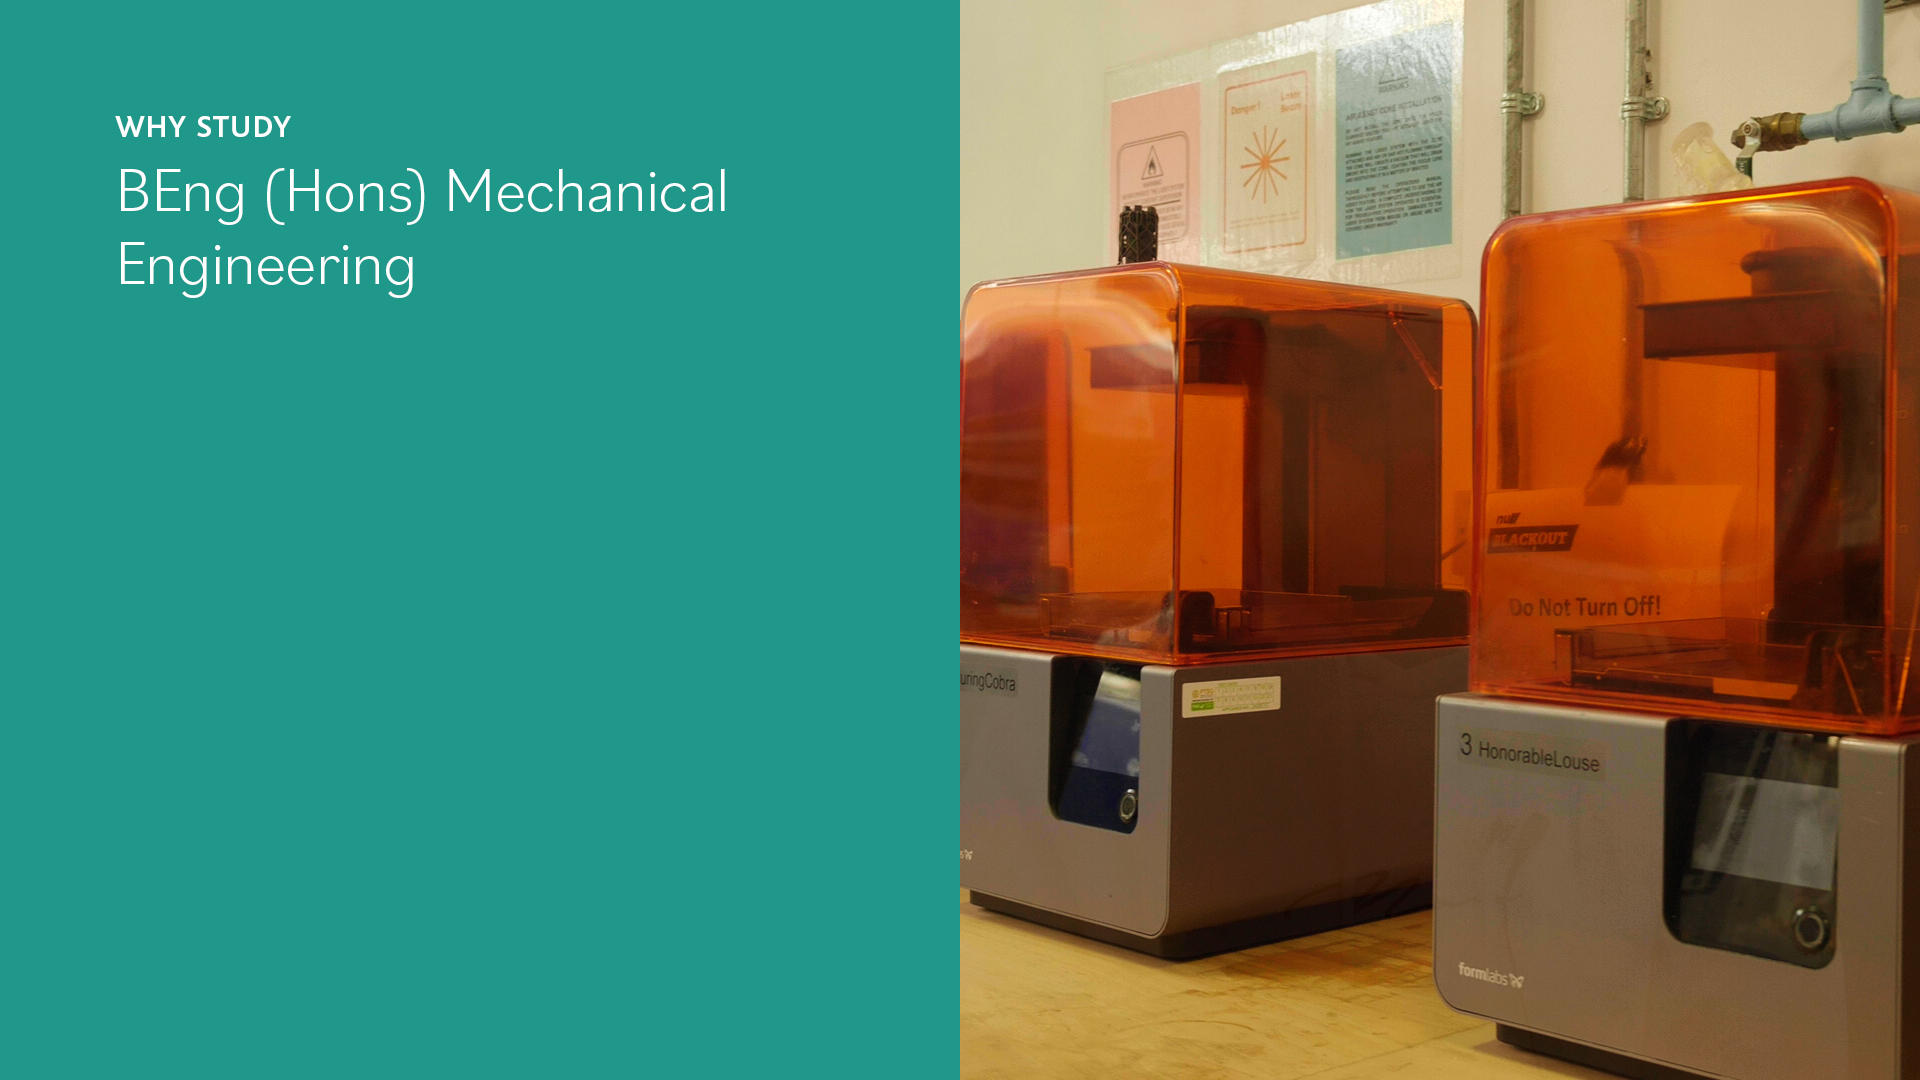 On the left of the screen is a teal block (portrait) with white copy over the top which reads 'Why study BEng (Hons) Mechanical Engineering'. To the right is a photo of 3D printers.